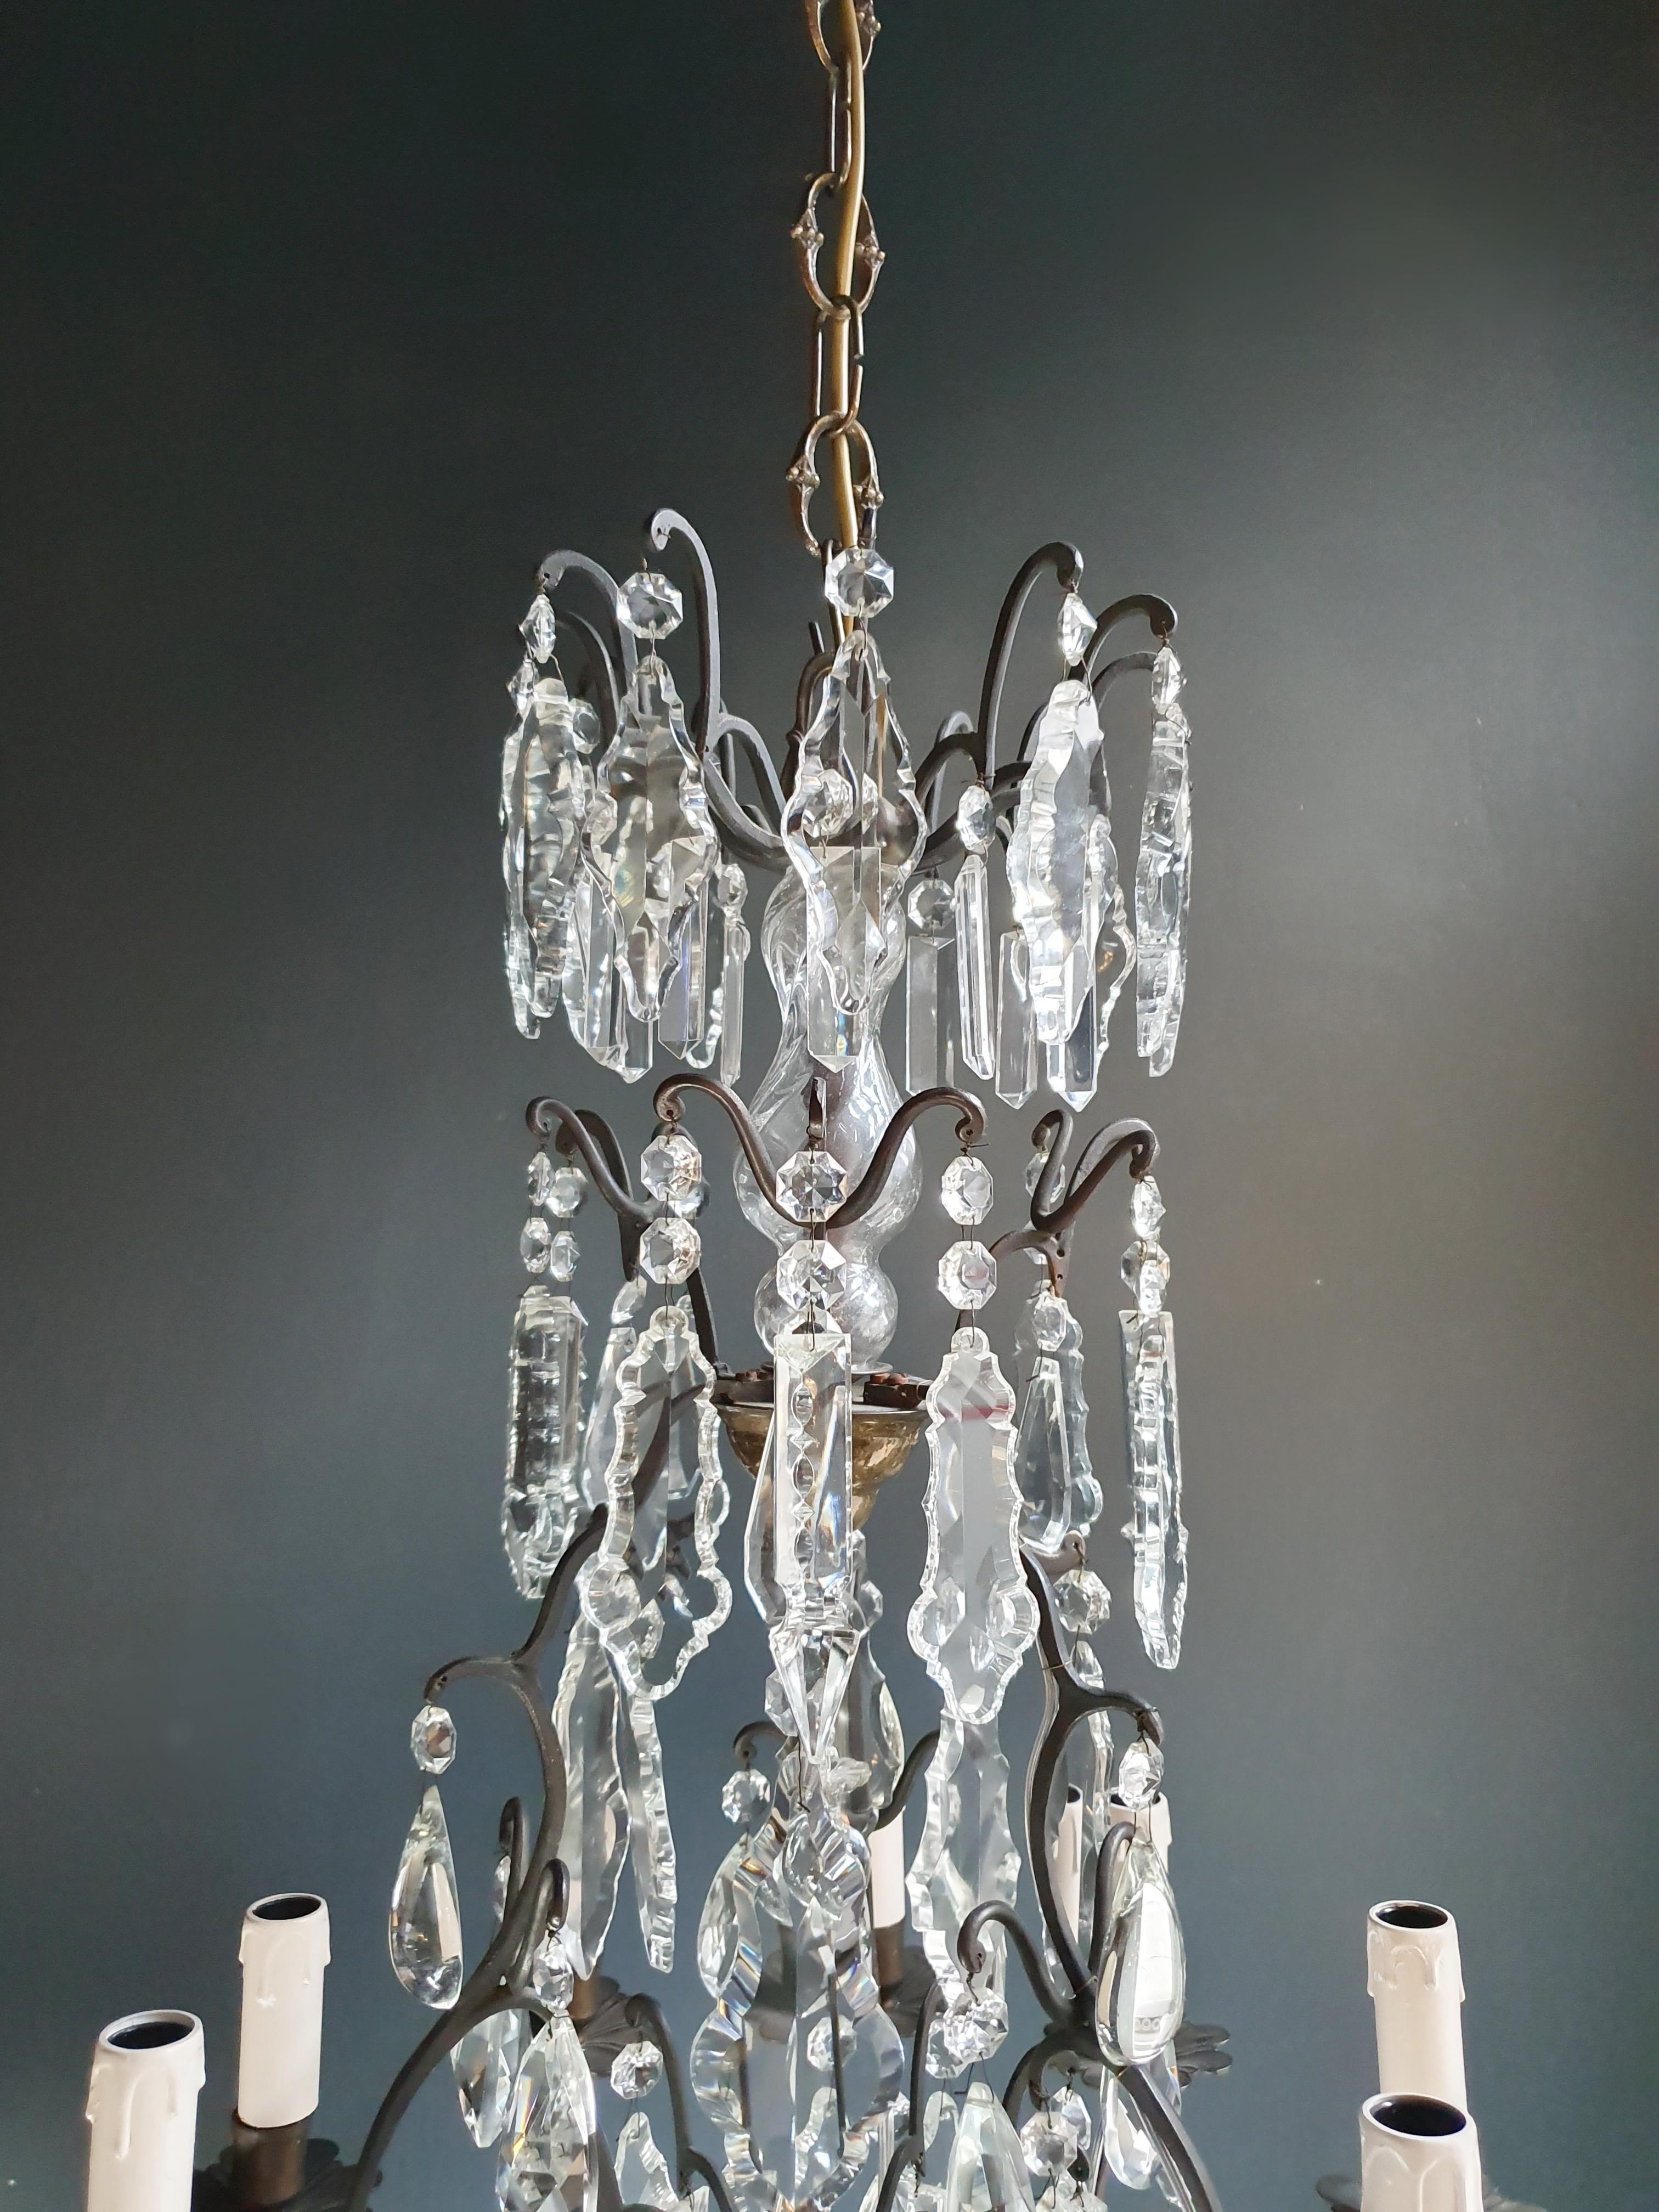 18th Century and Earlier French Candelabrum Black Crystal Antique Chandelier Ceiling Lustre Art Nouveau